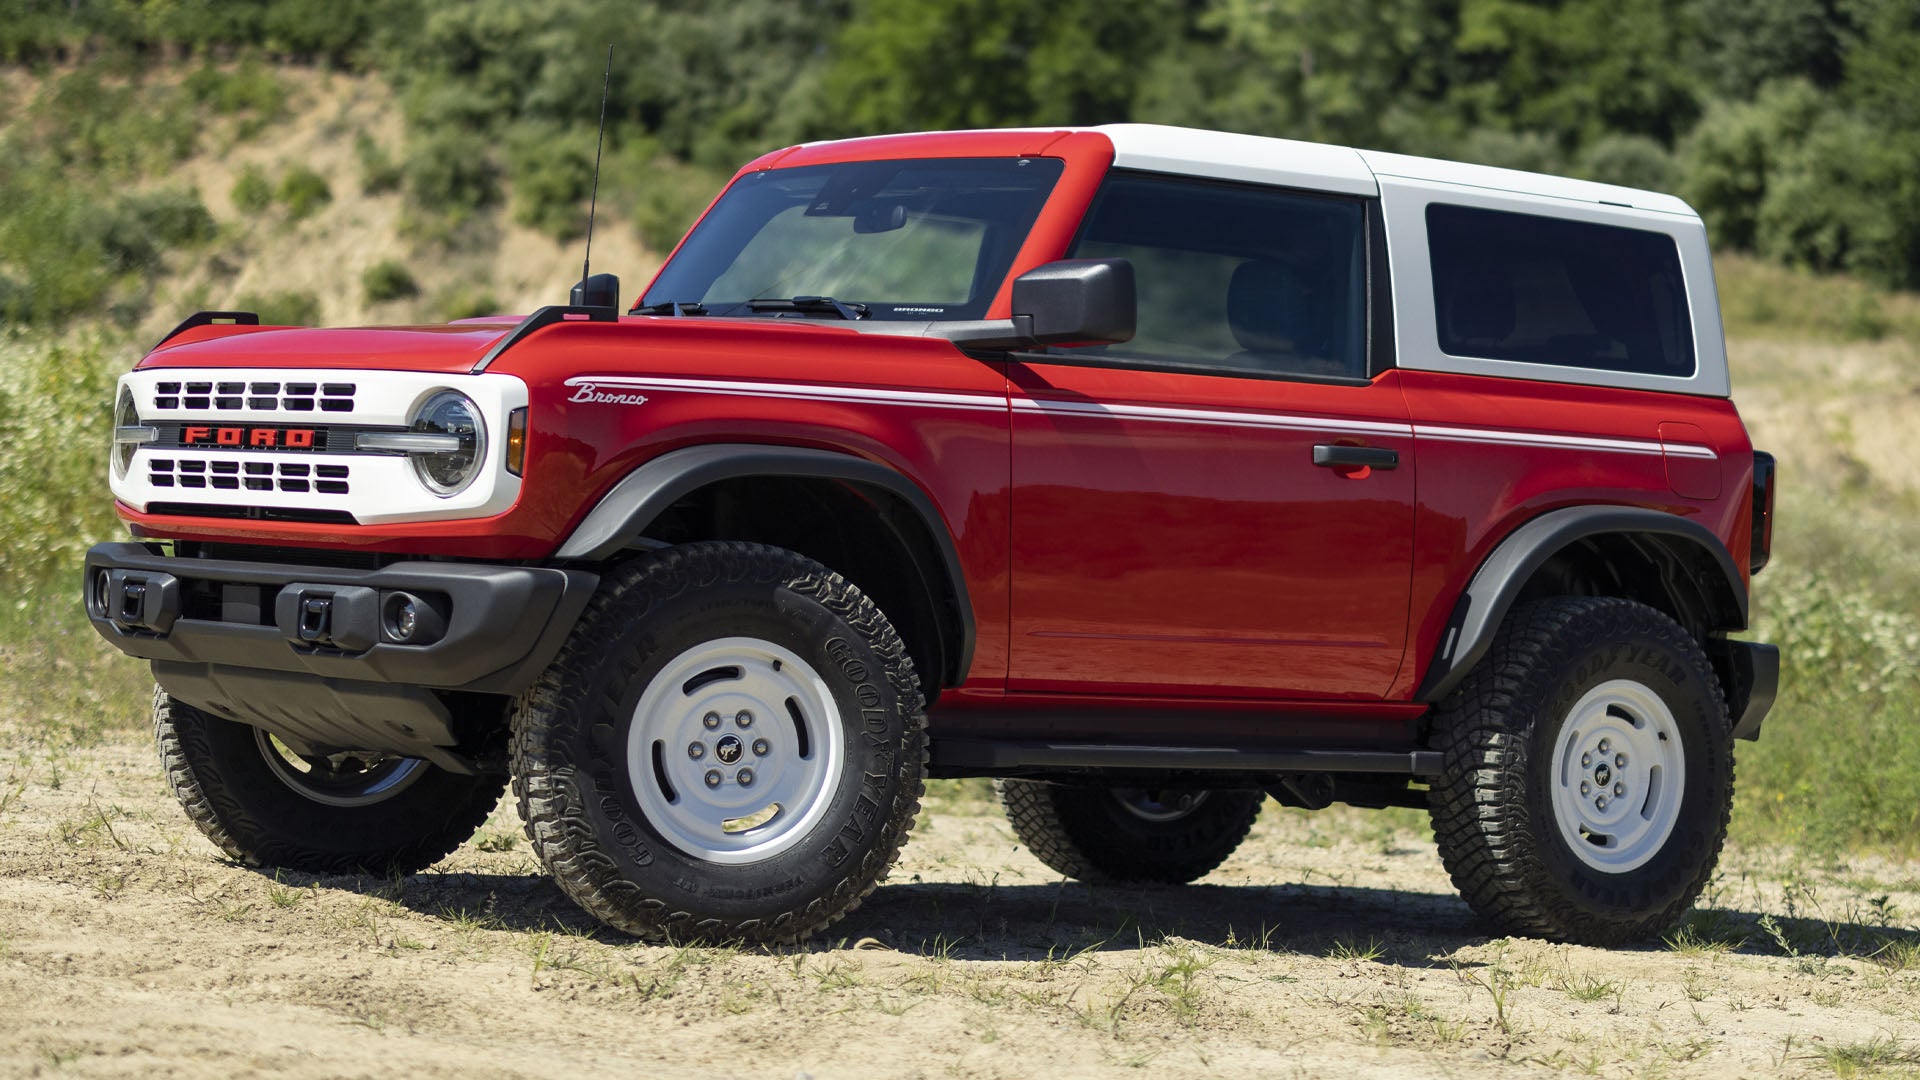 GM Says Gas-Powered Ford Bronco Rival Isn’t Going to Happen